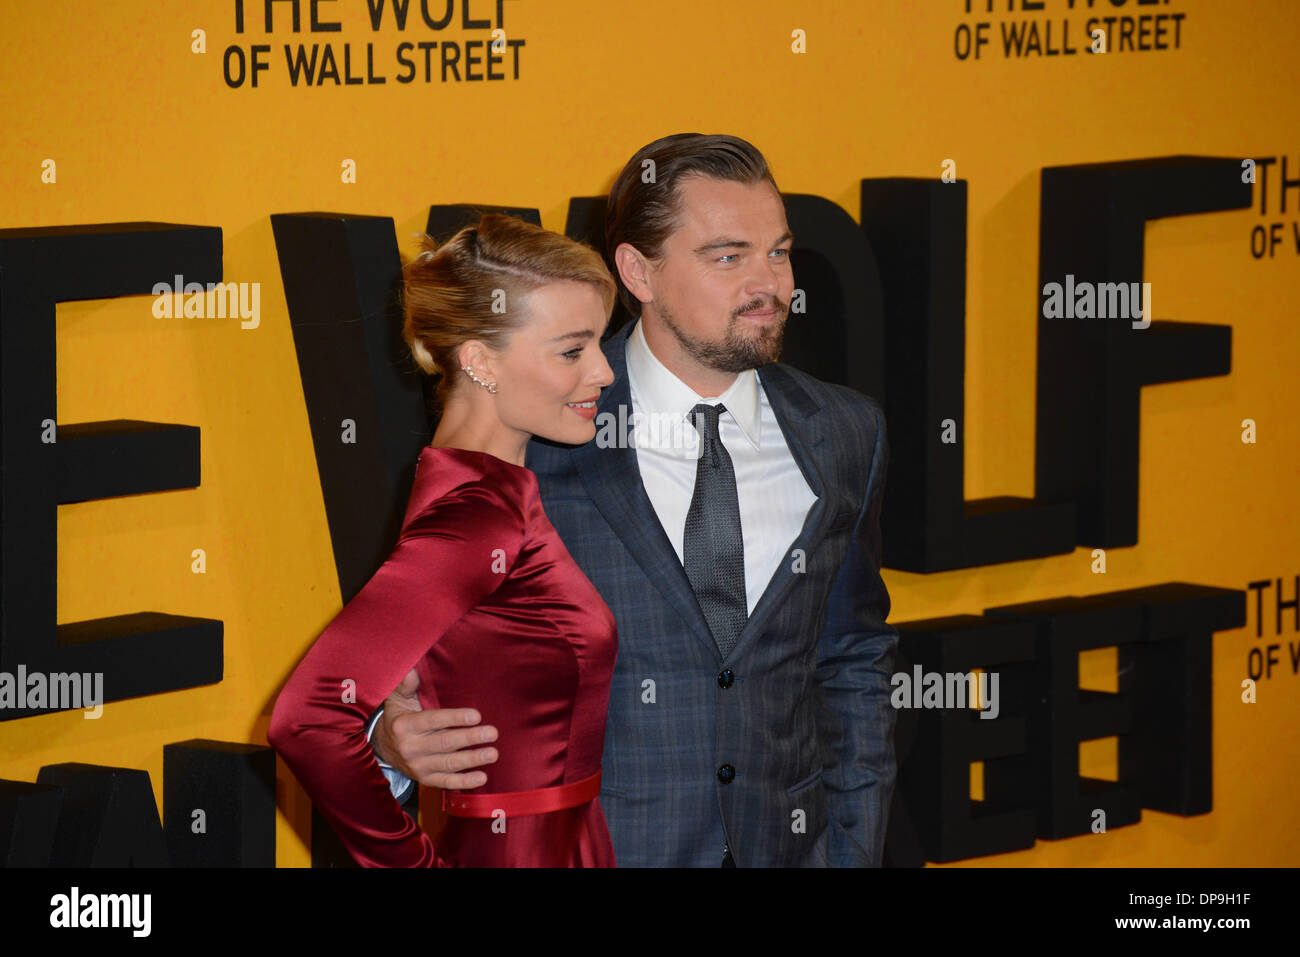 London, UK. 9th January 2014. Leonardo DiCaprio and Margot Robbie arrives at the UK Premiere - the Wolf of Wall Street at Leicester Square in London, 9th January 2014, Photo by See Li/Alamy Live News Stock Photo